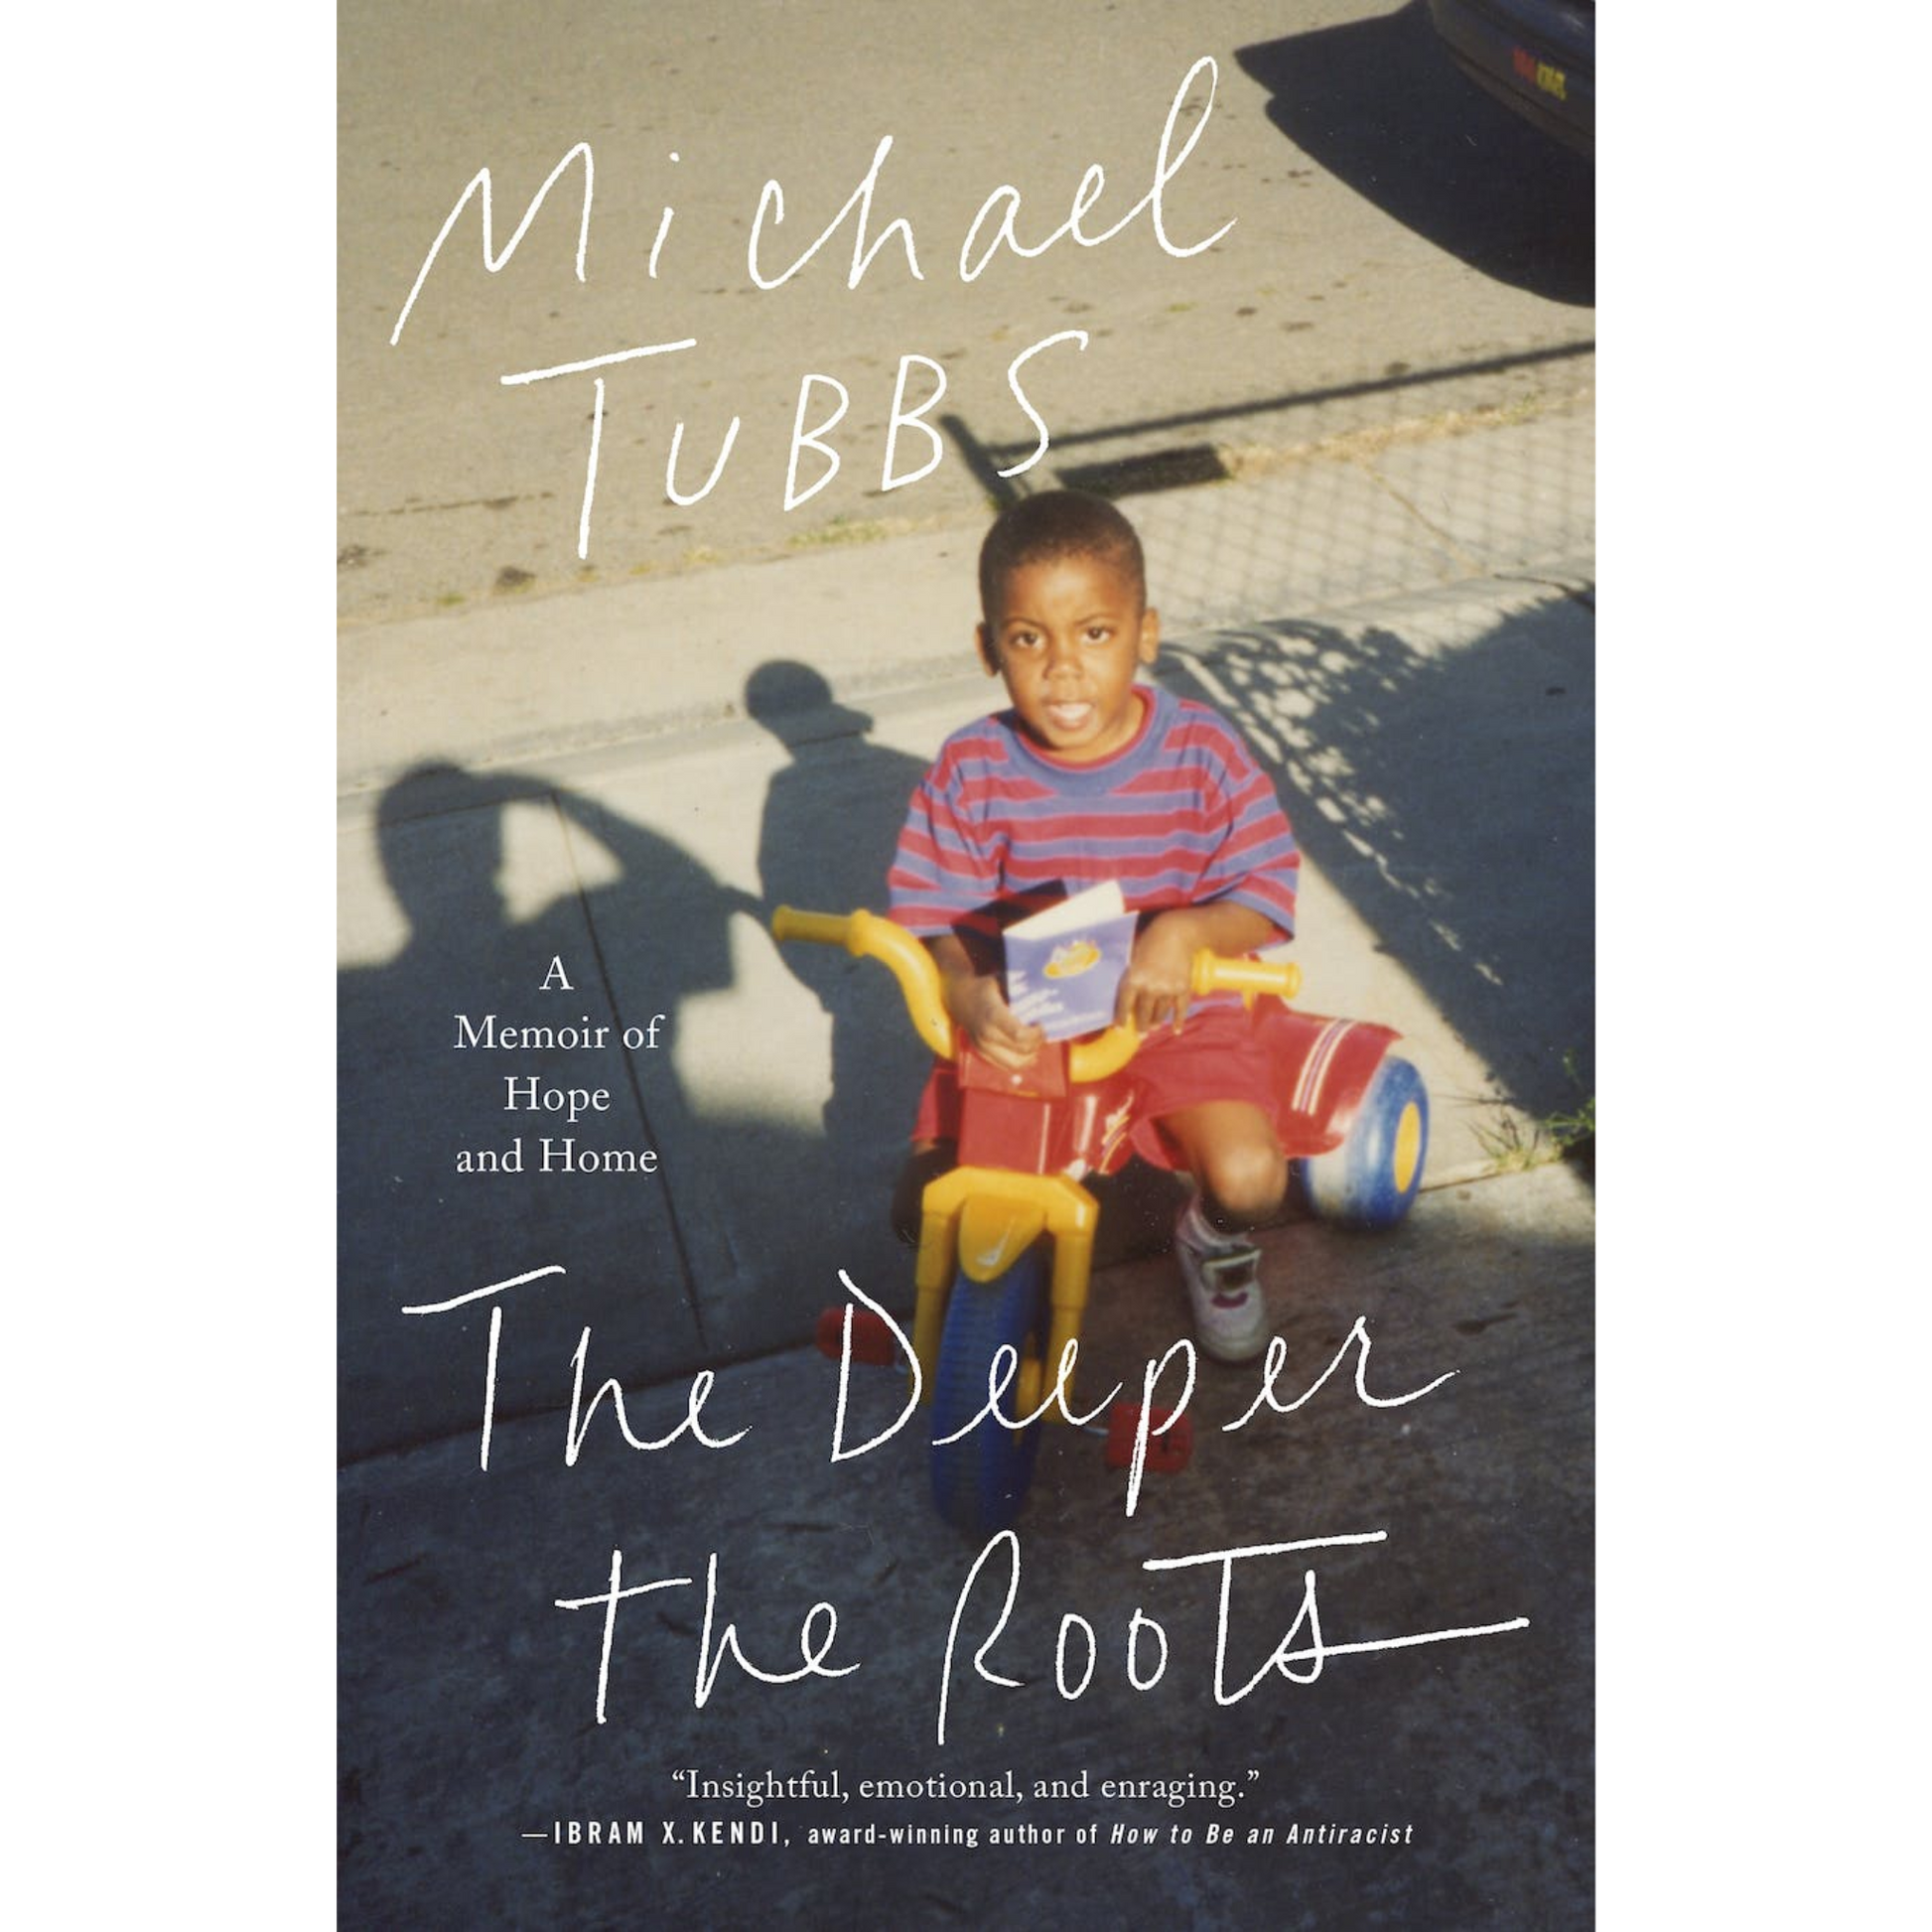 the deeper the roots michael tubbs pb